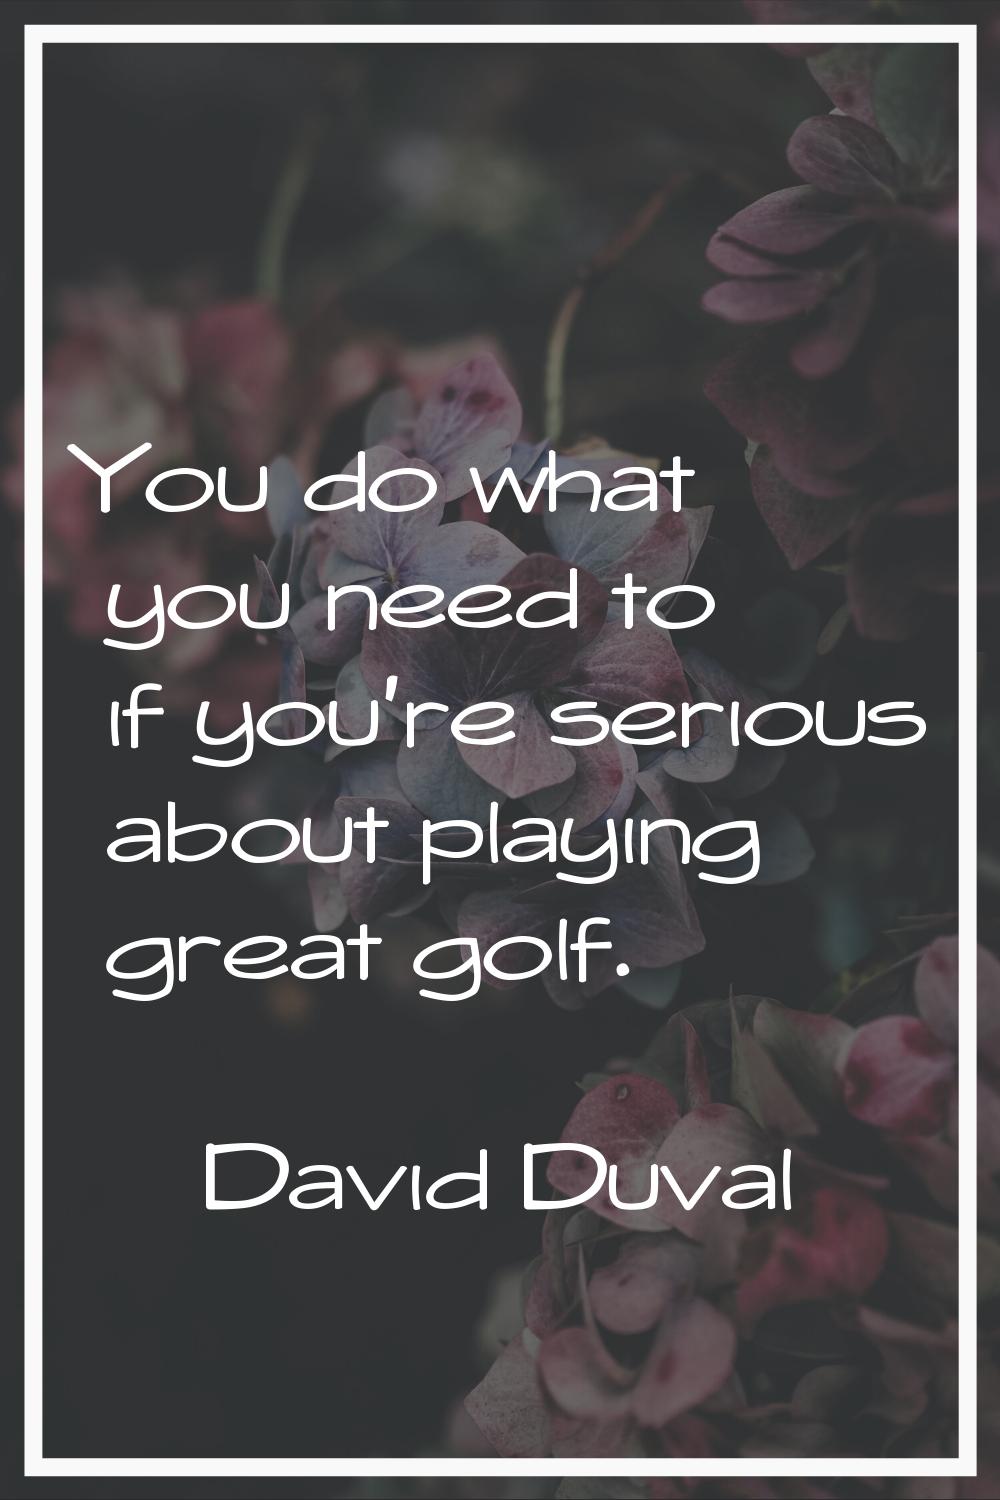 You do what you need to if you're serious about playing great golf.